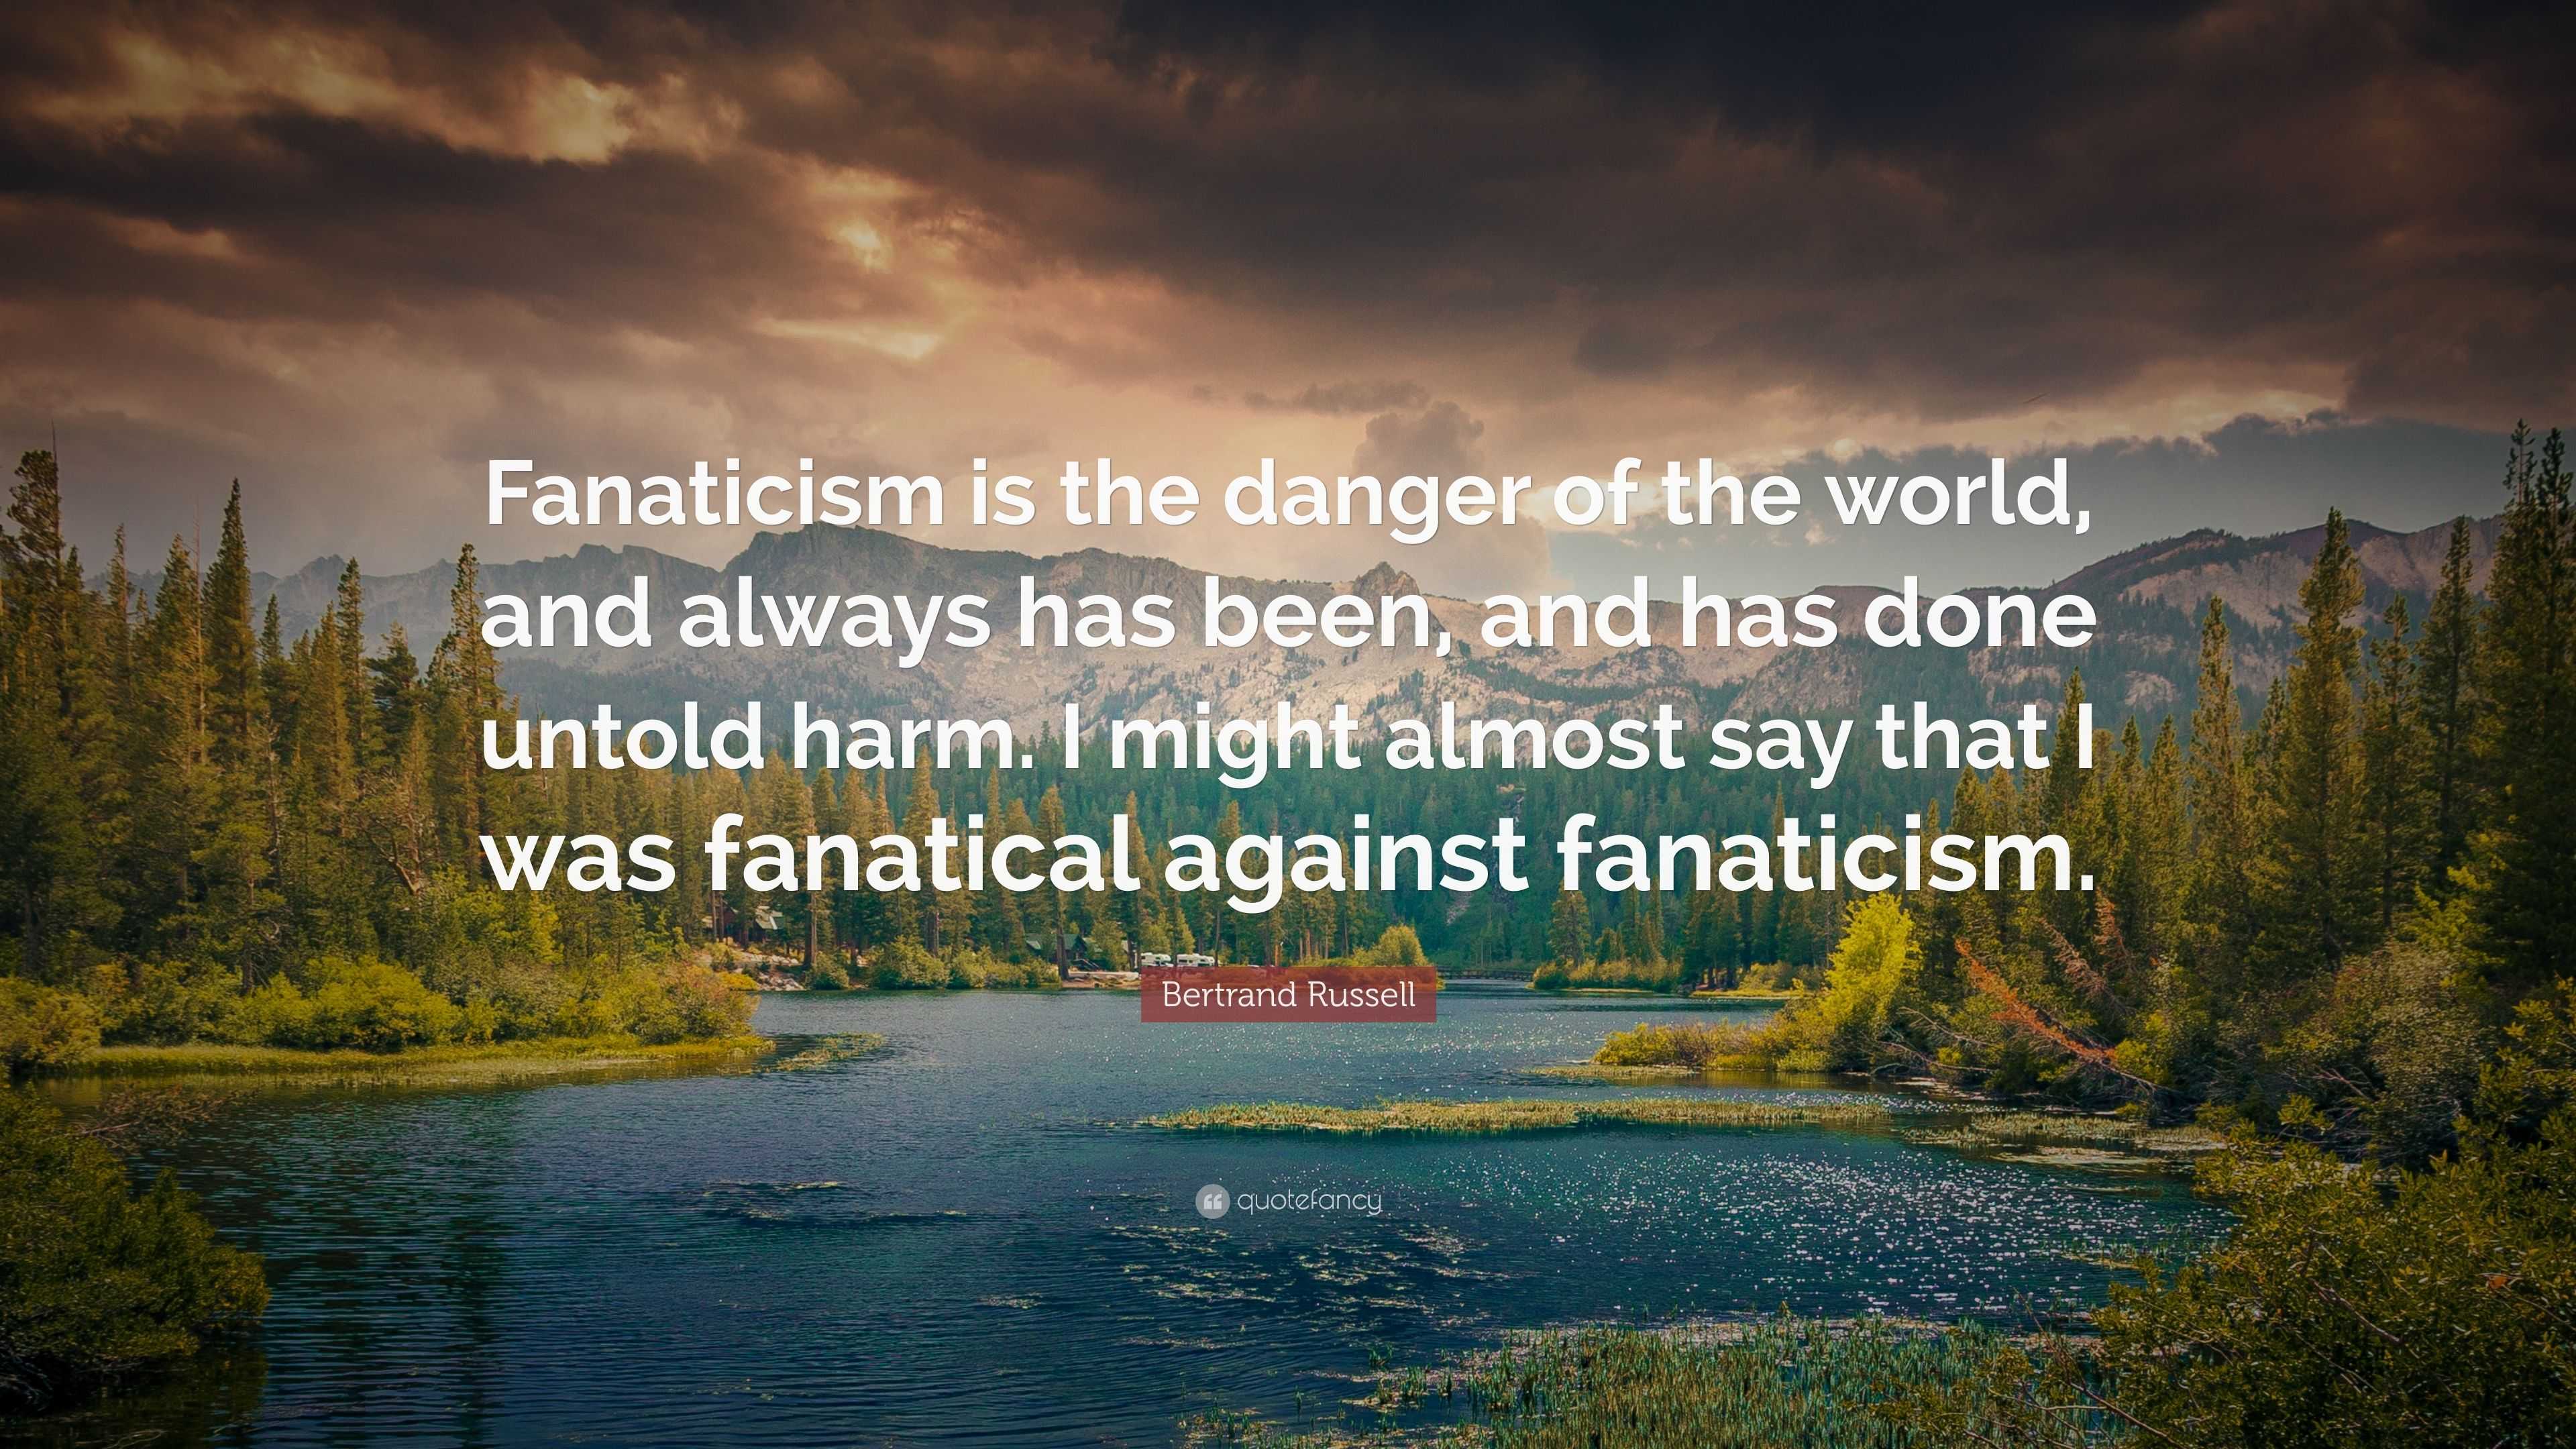 Bertrand Russell Quote: “Fanaticism is the danger of the world, and ...